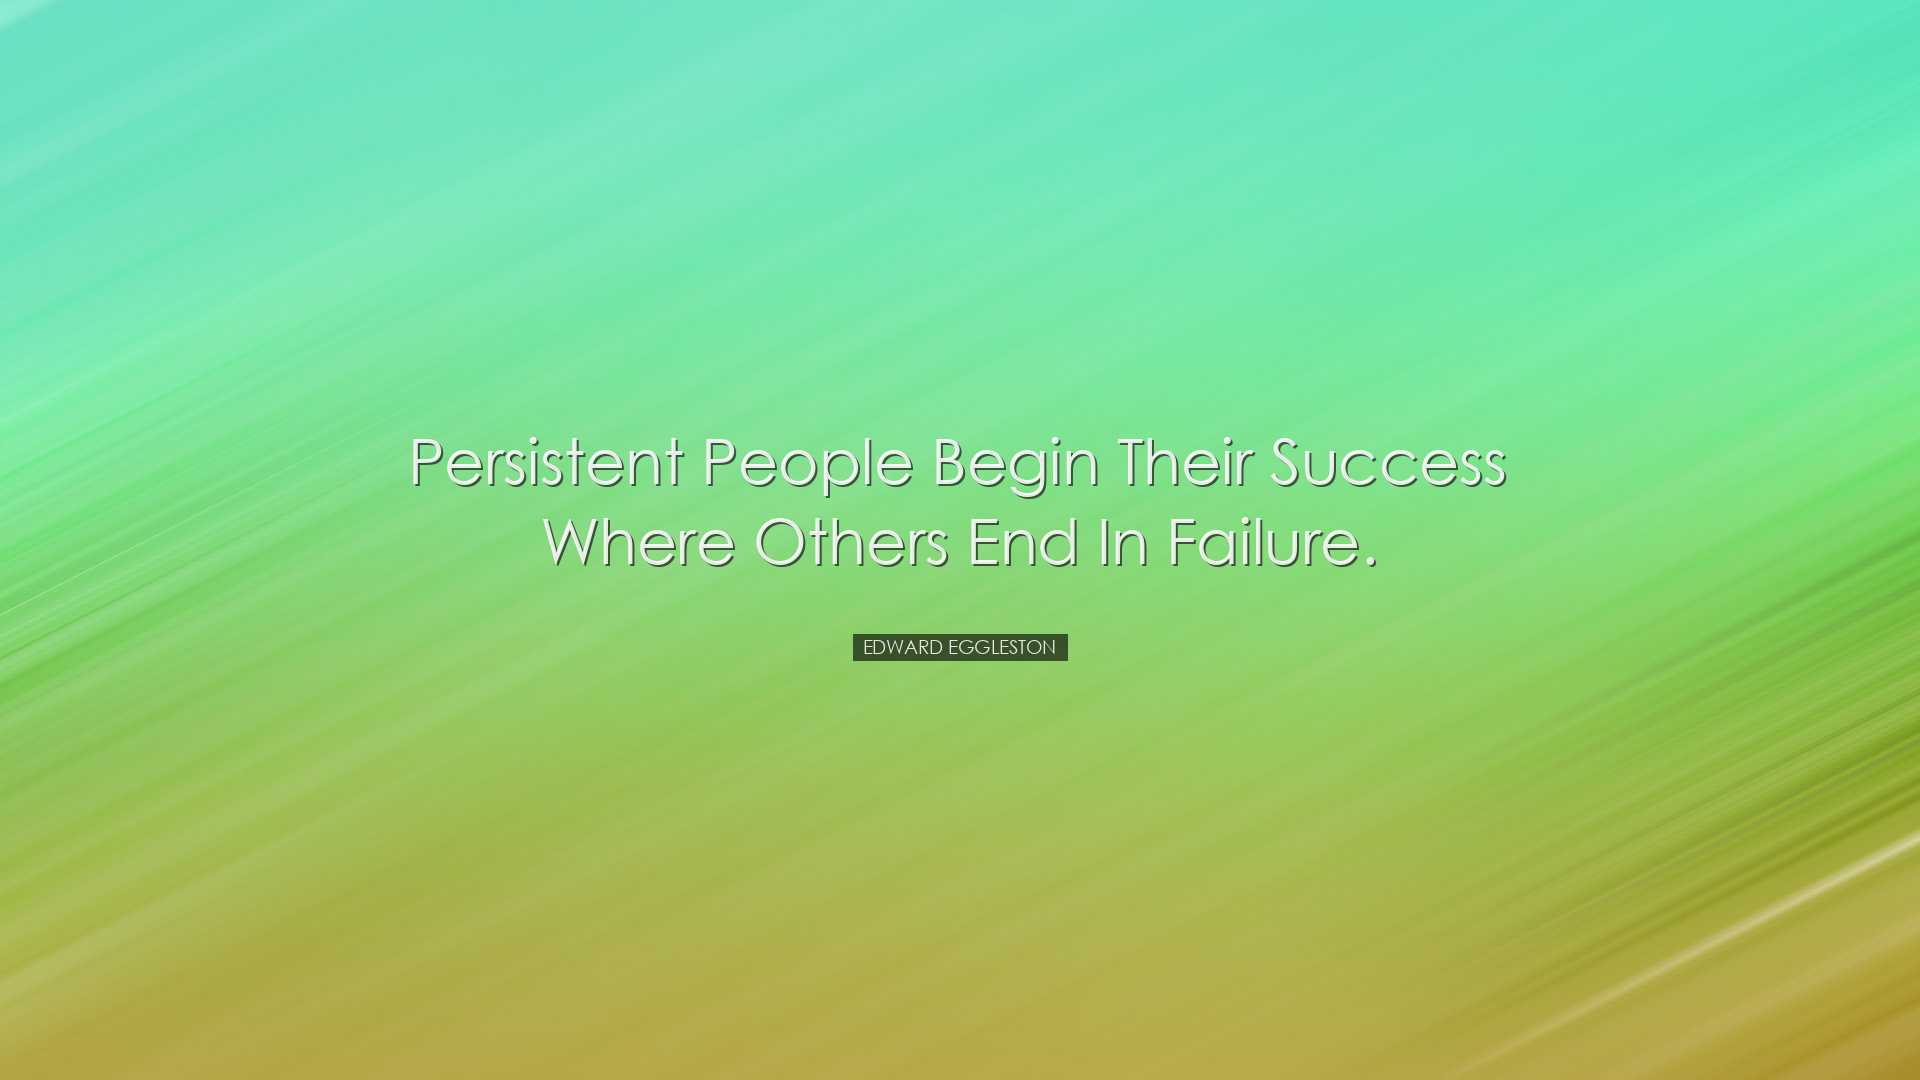 Persistent people begin their success where others end in failure.